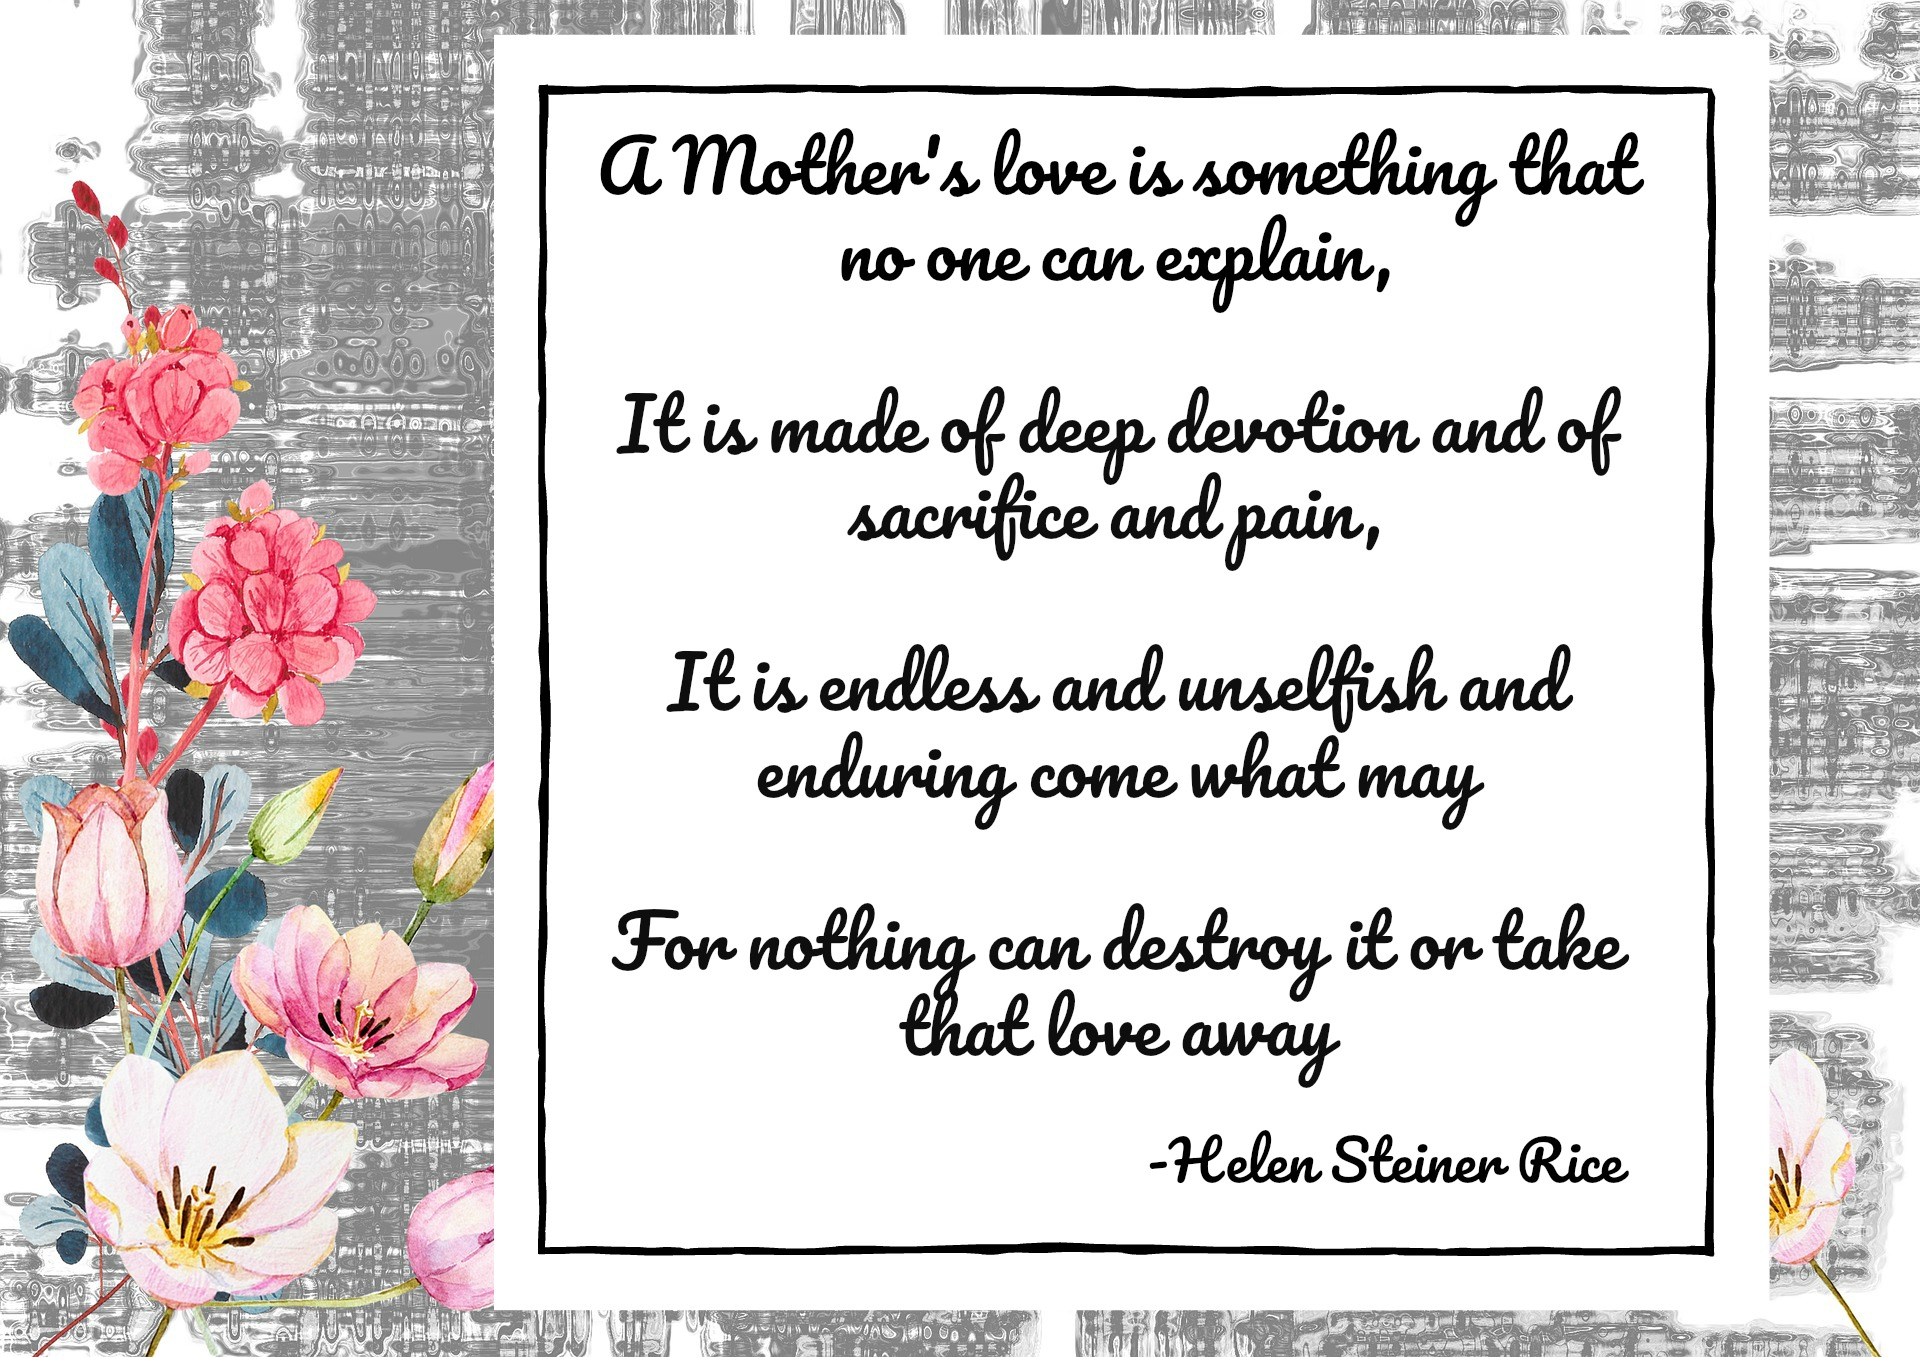 A Mother's Love, Poem By Helen Steiner Rice | Melanie's Library